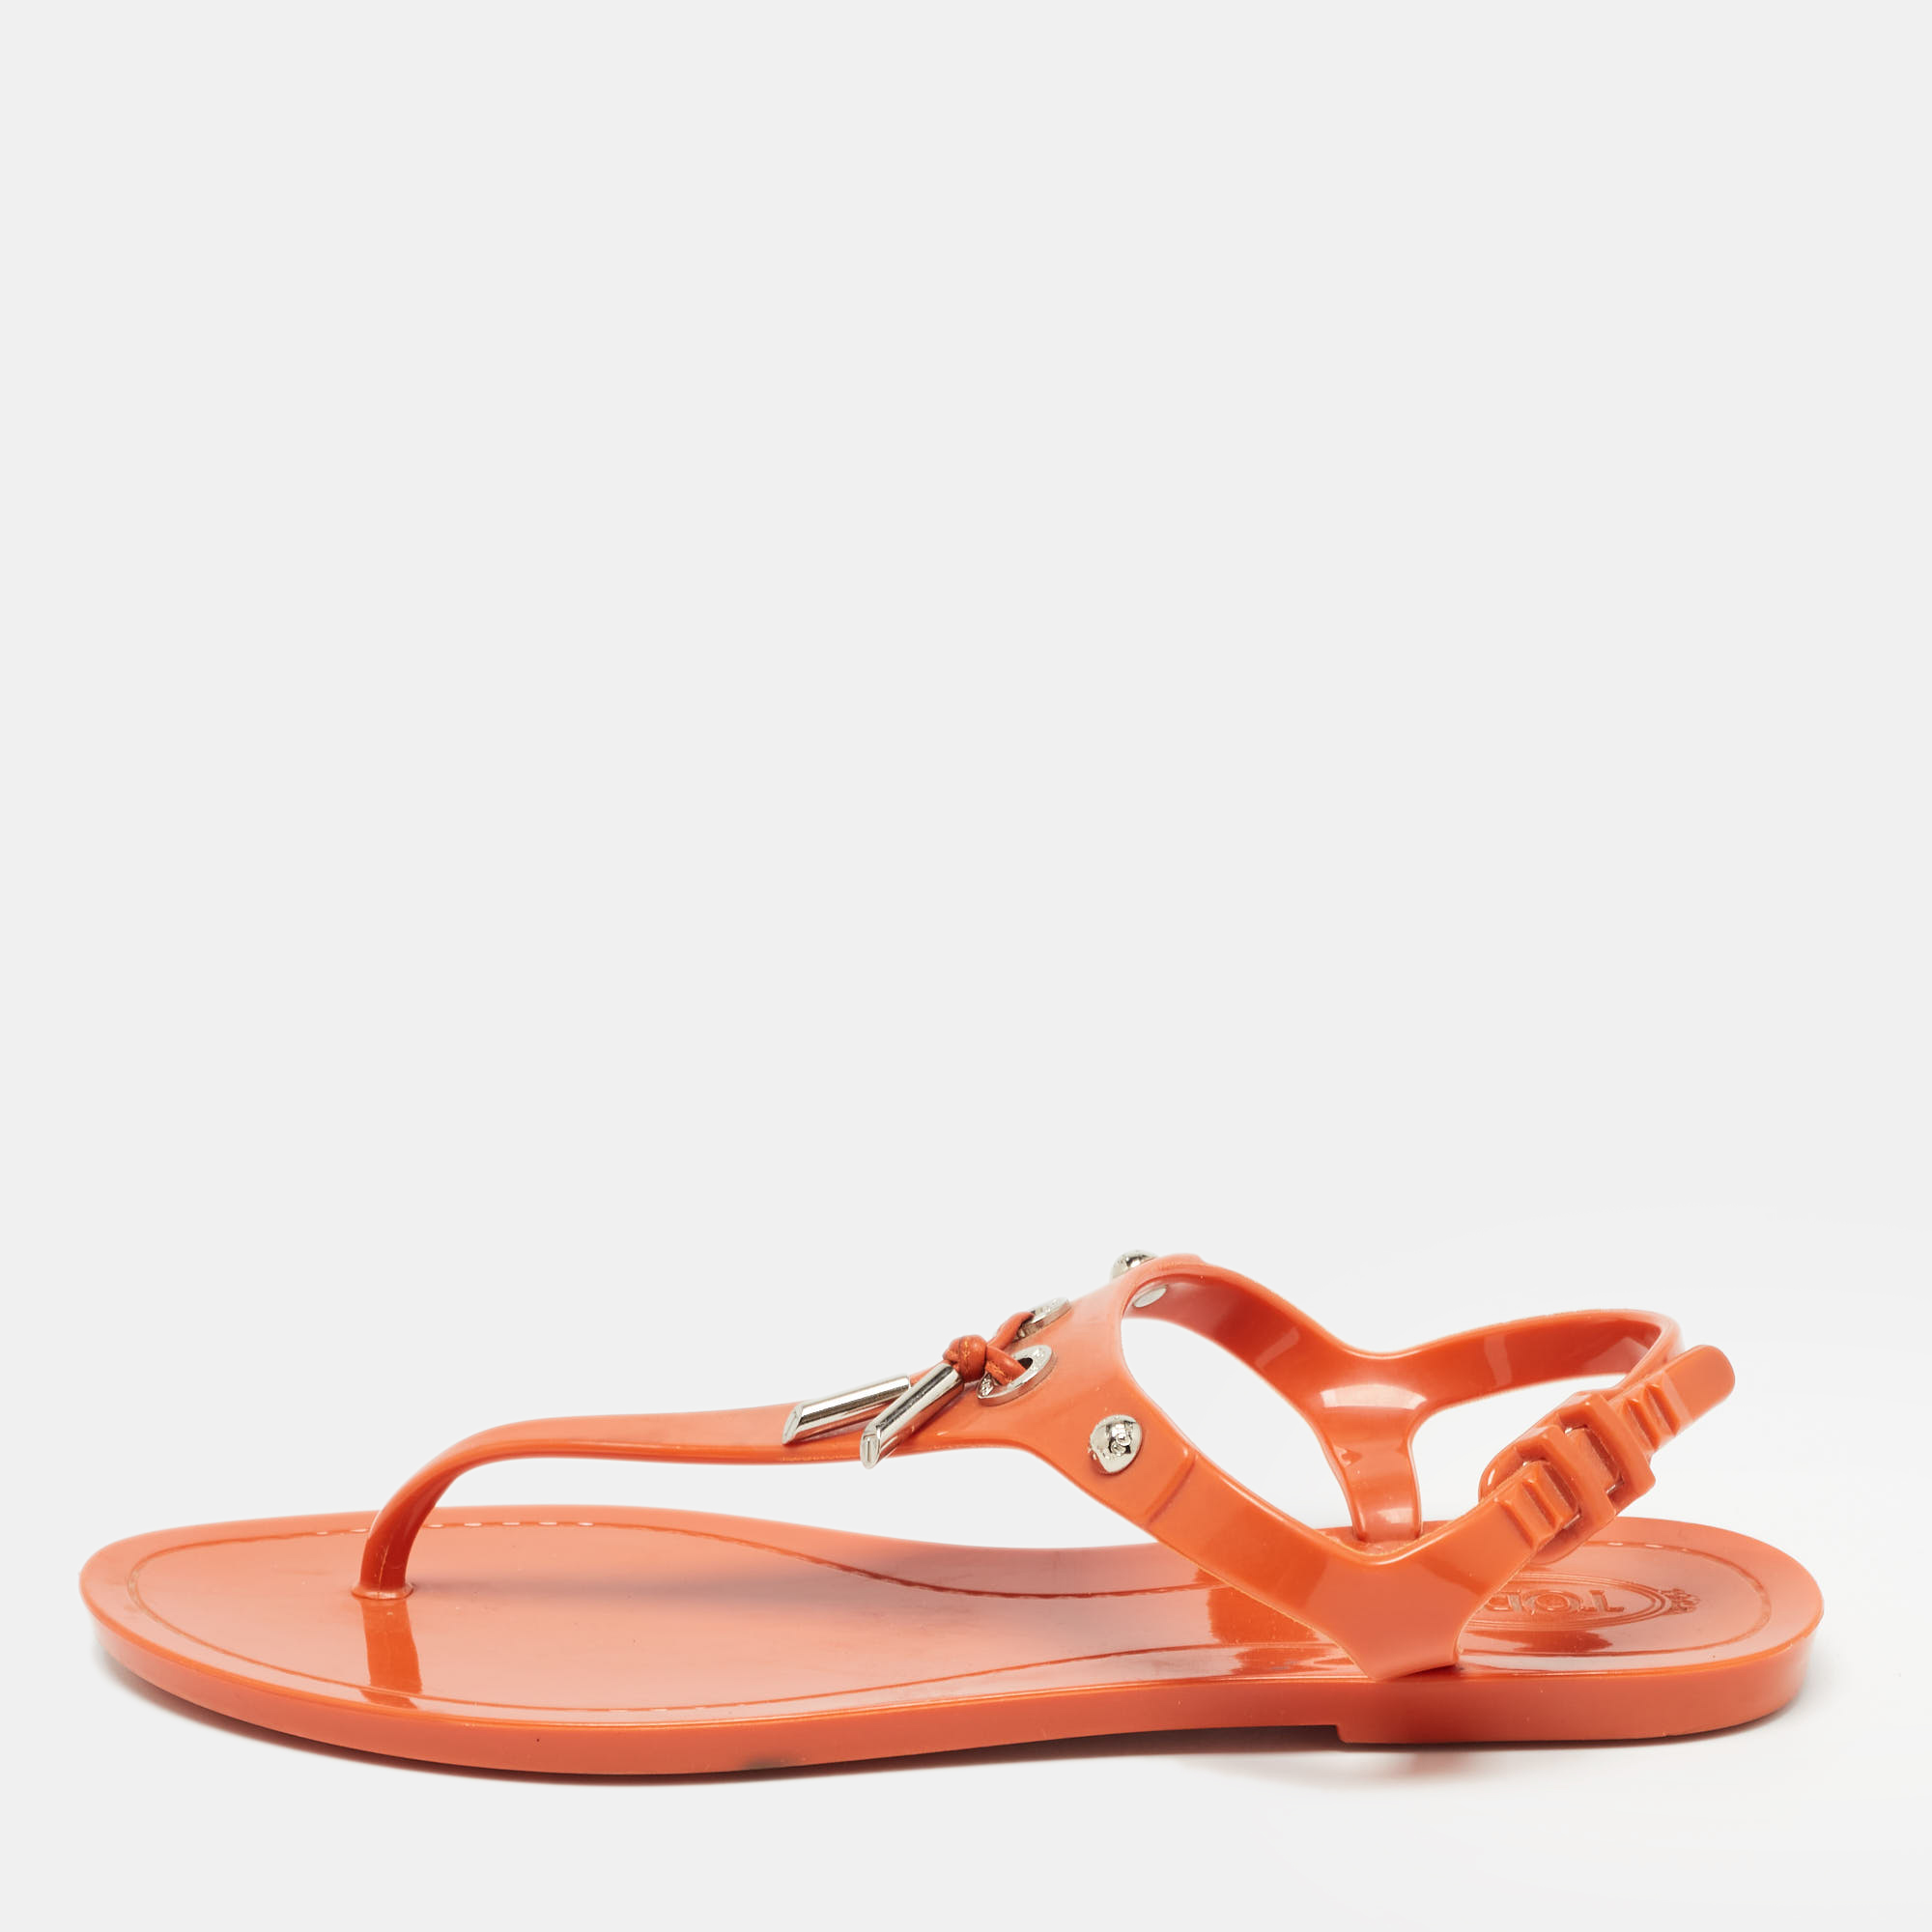 Pre-owned Tod's Orange Rubber Thong Flat Sandals Size 38